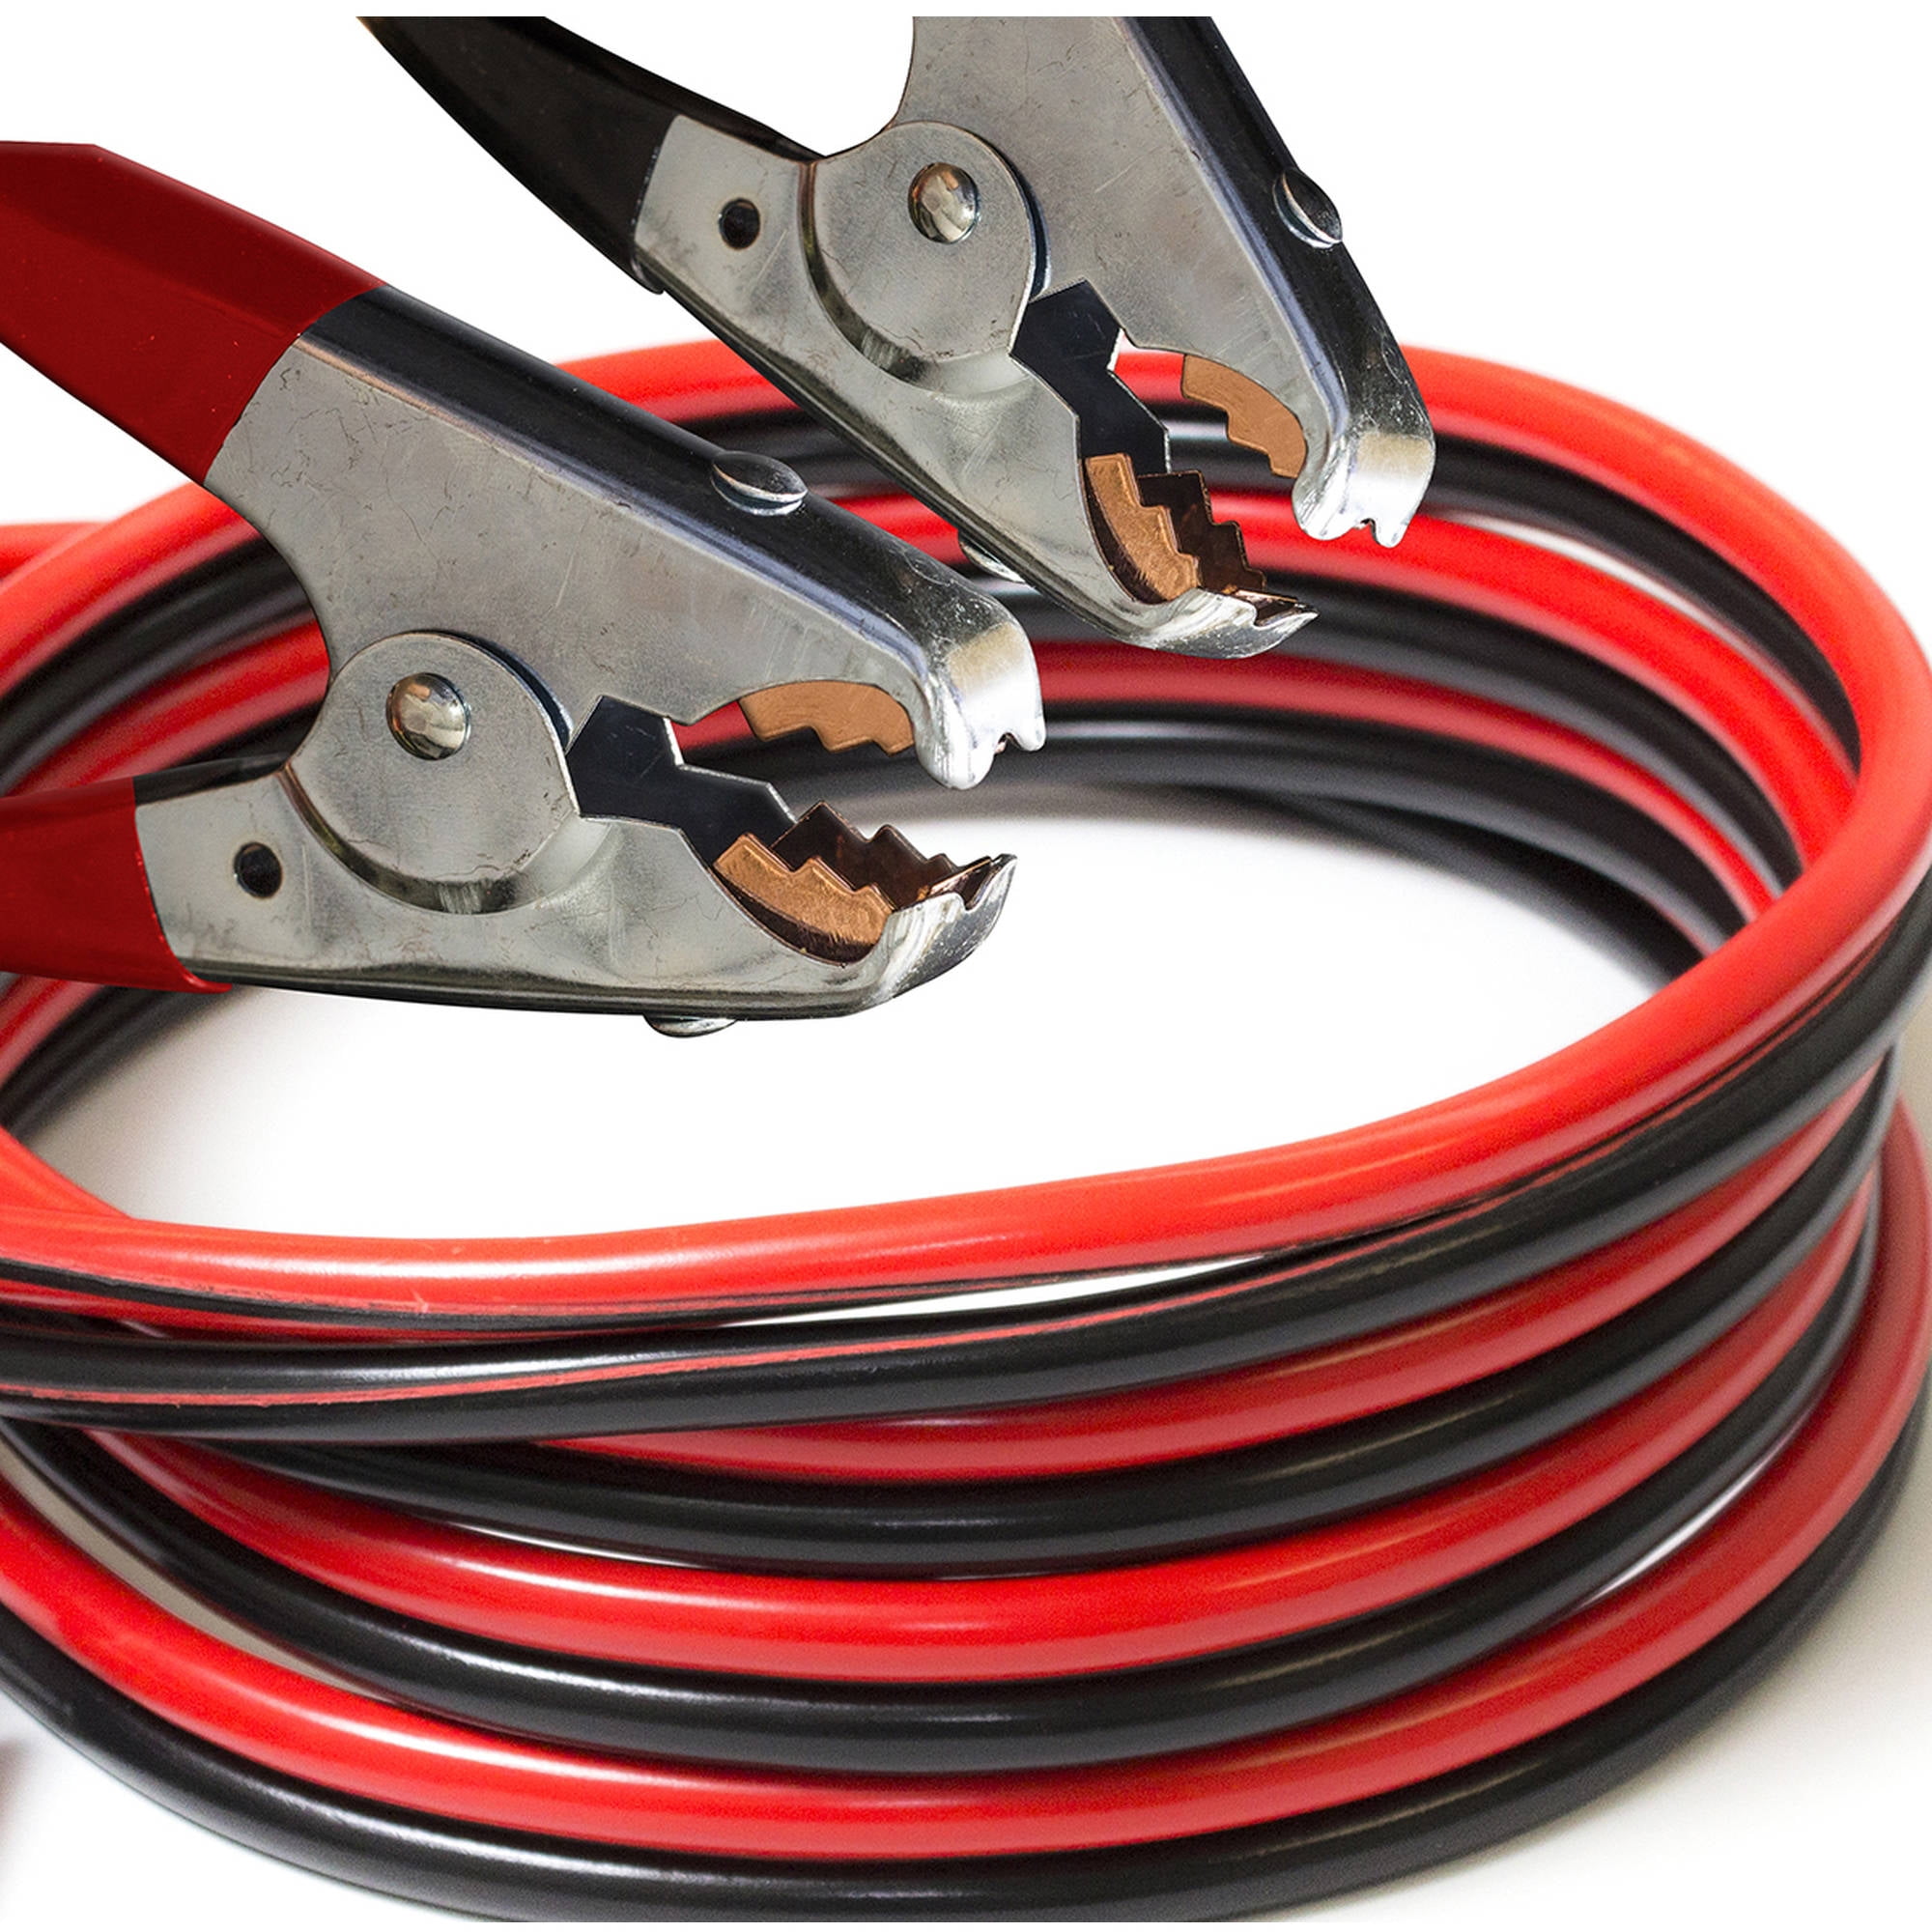 HEAVY DUTY JUMP LEAD BOOSTER CABLES 70AMP 2MTR LENGTH 